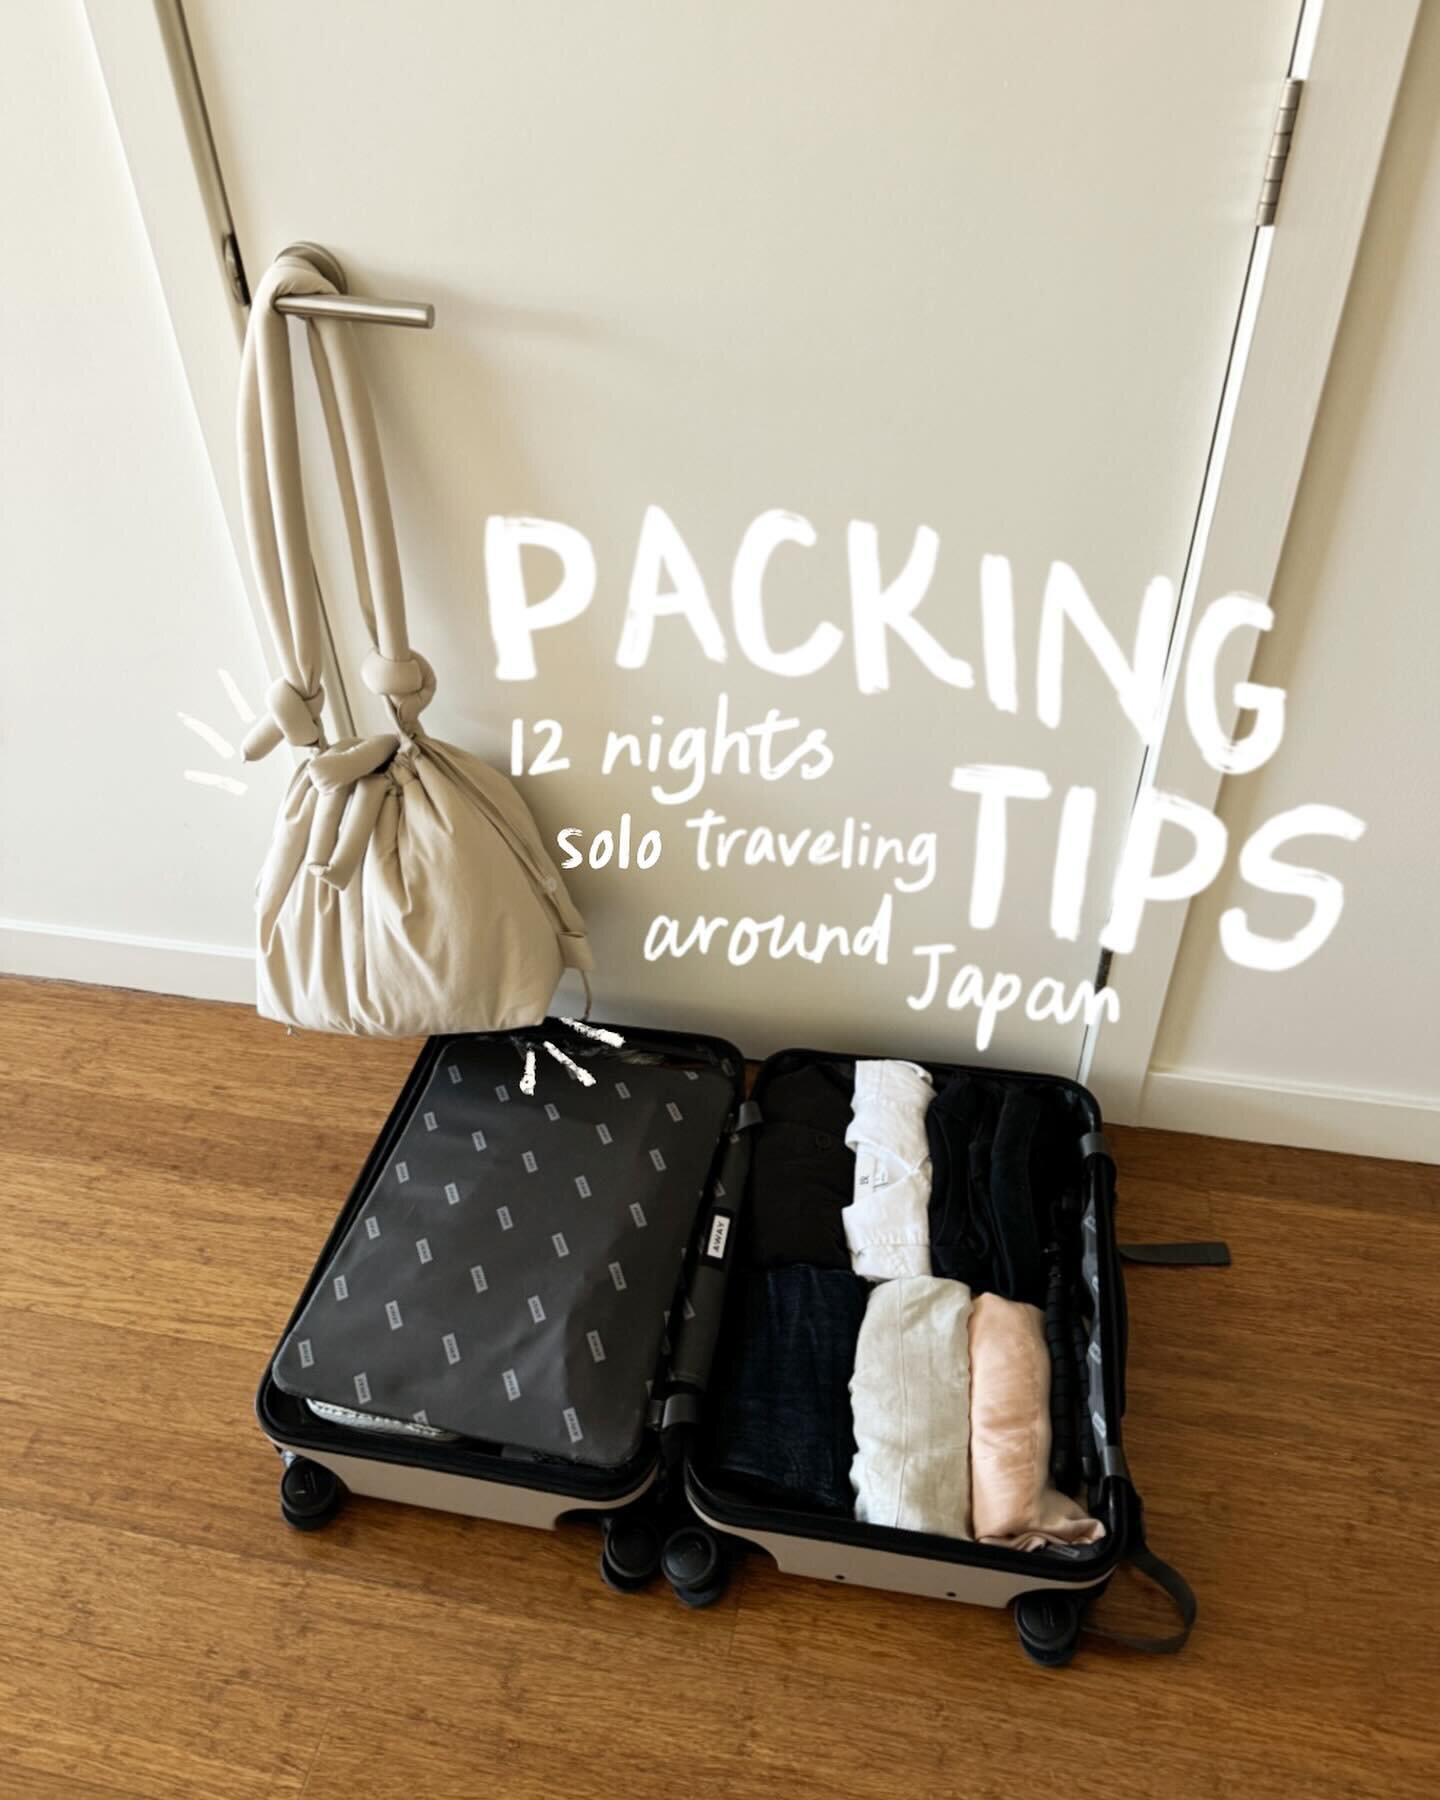 Packing tips for my 12 night solo healing journey throughout Japan 🎌💭 i&rsquo;m only traveling with a carry on, but packing a collapsible check-in bag for the return flight since I definitely plan on shopping 🌝

Packing allllll the comforting thin